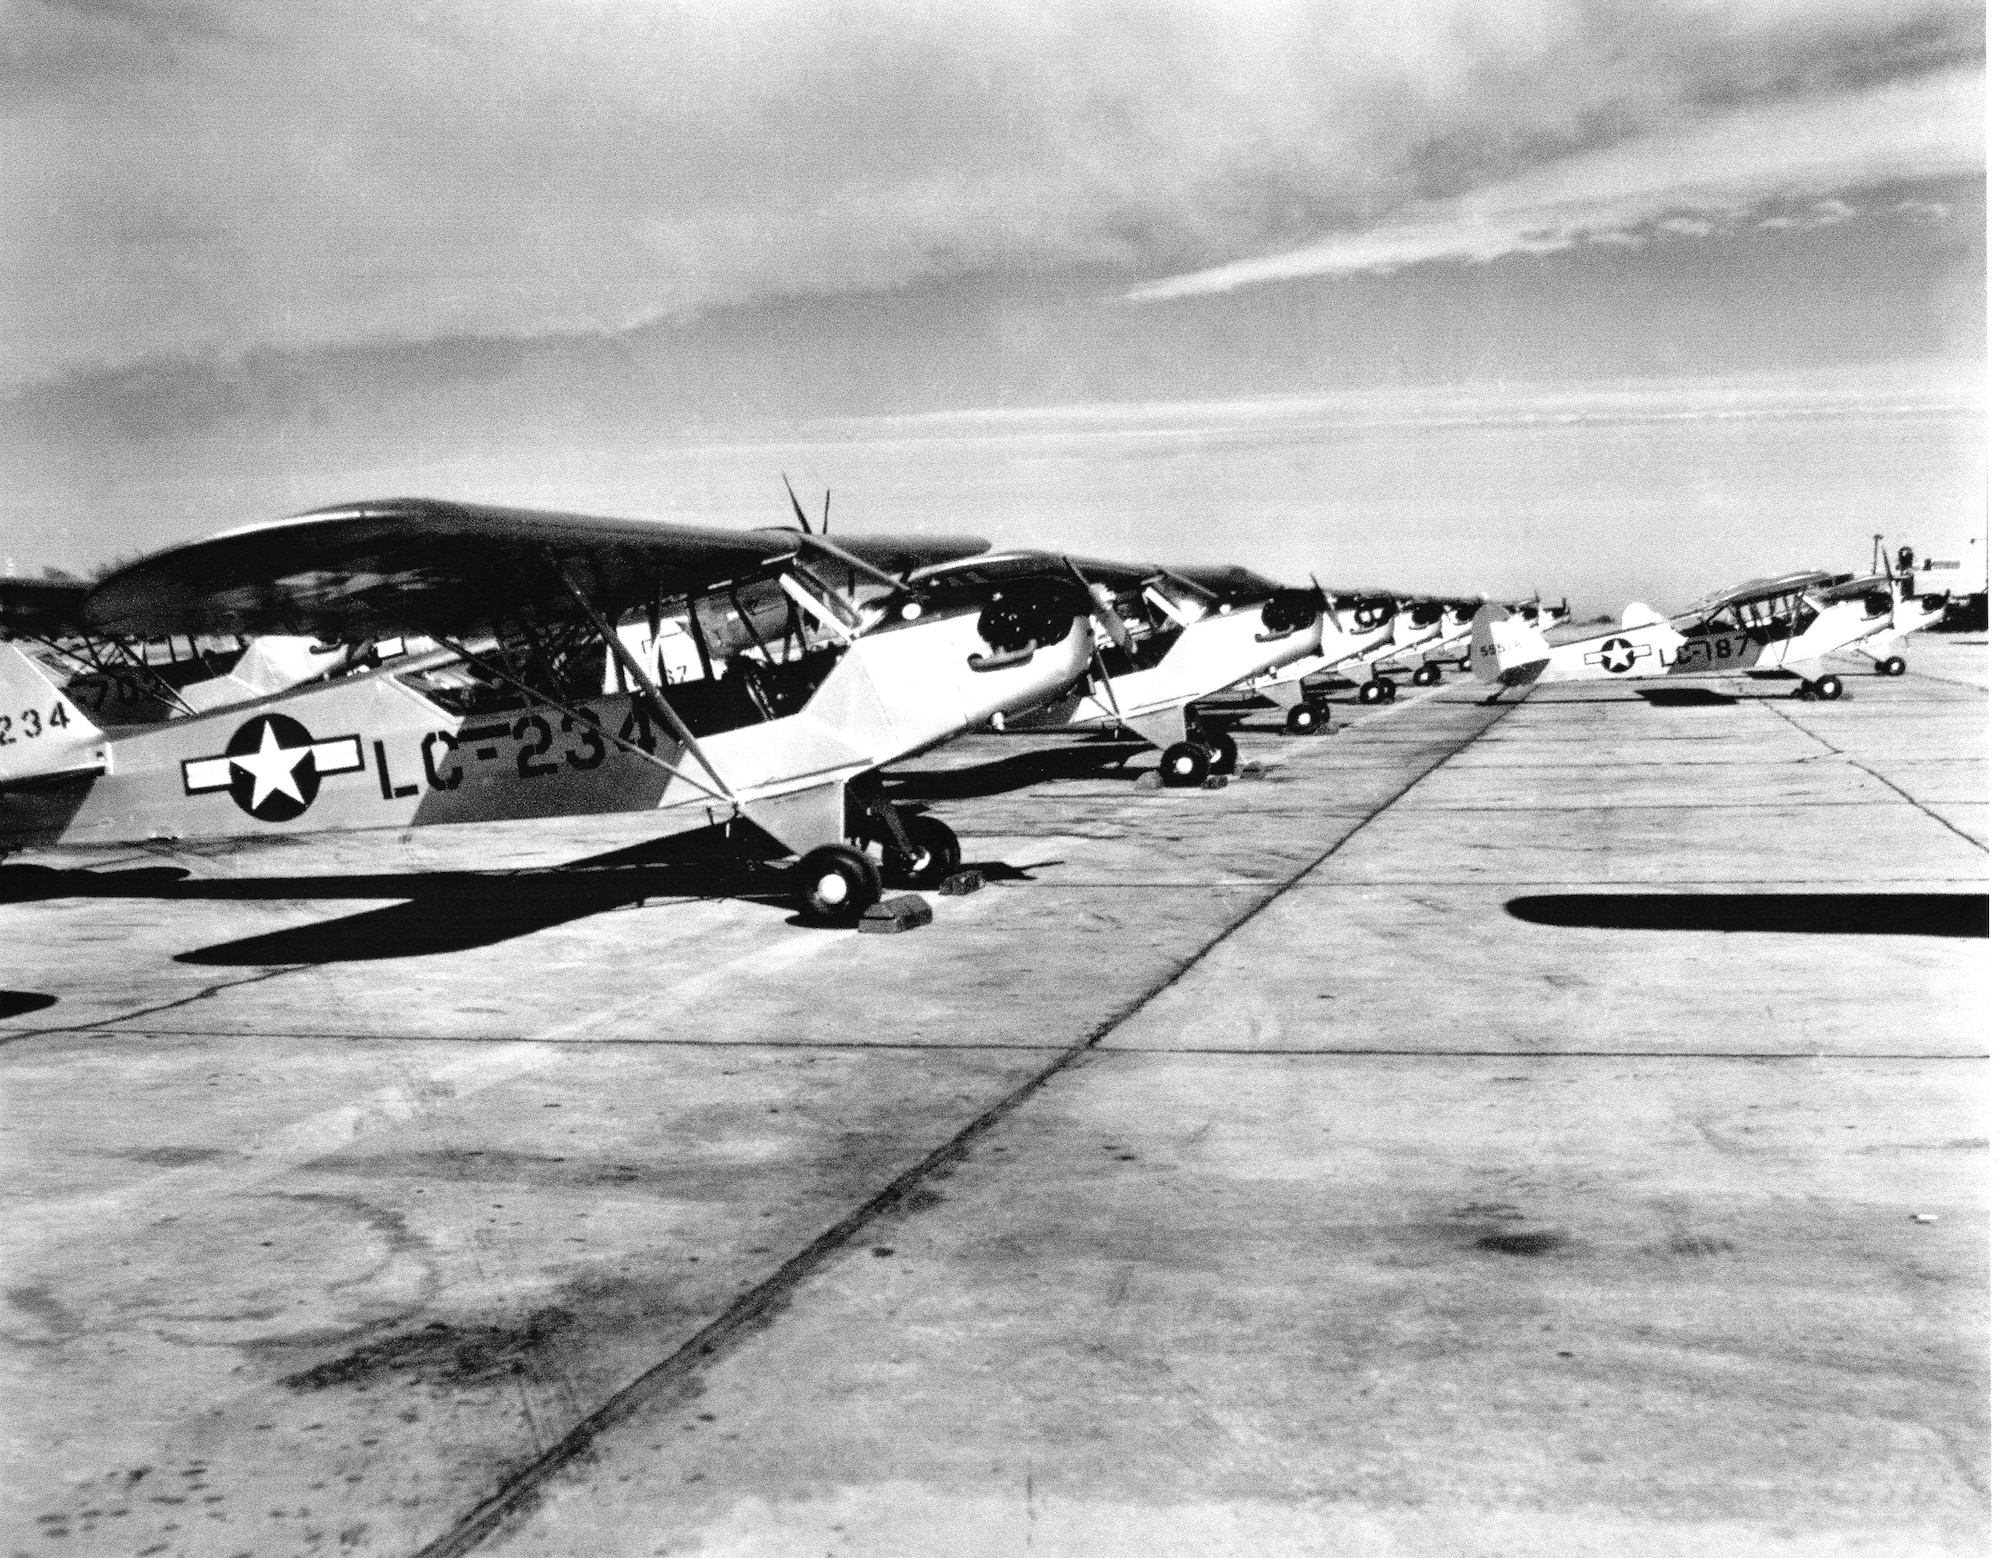 Between January 1947 and June 1953, 241 L-4s were processed through the maintenance lines in Oklahoma City at Tinker. (Photo courtesy of Tinker History Office)